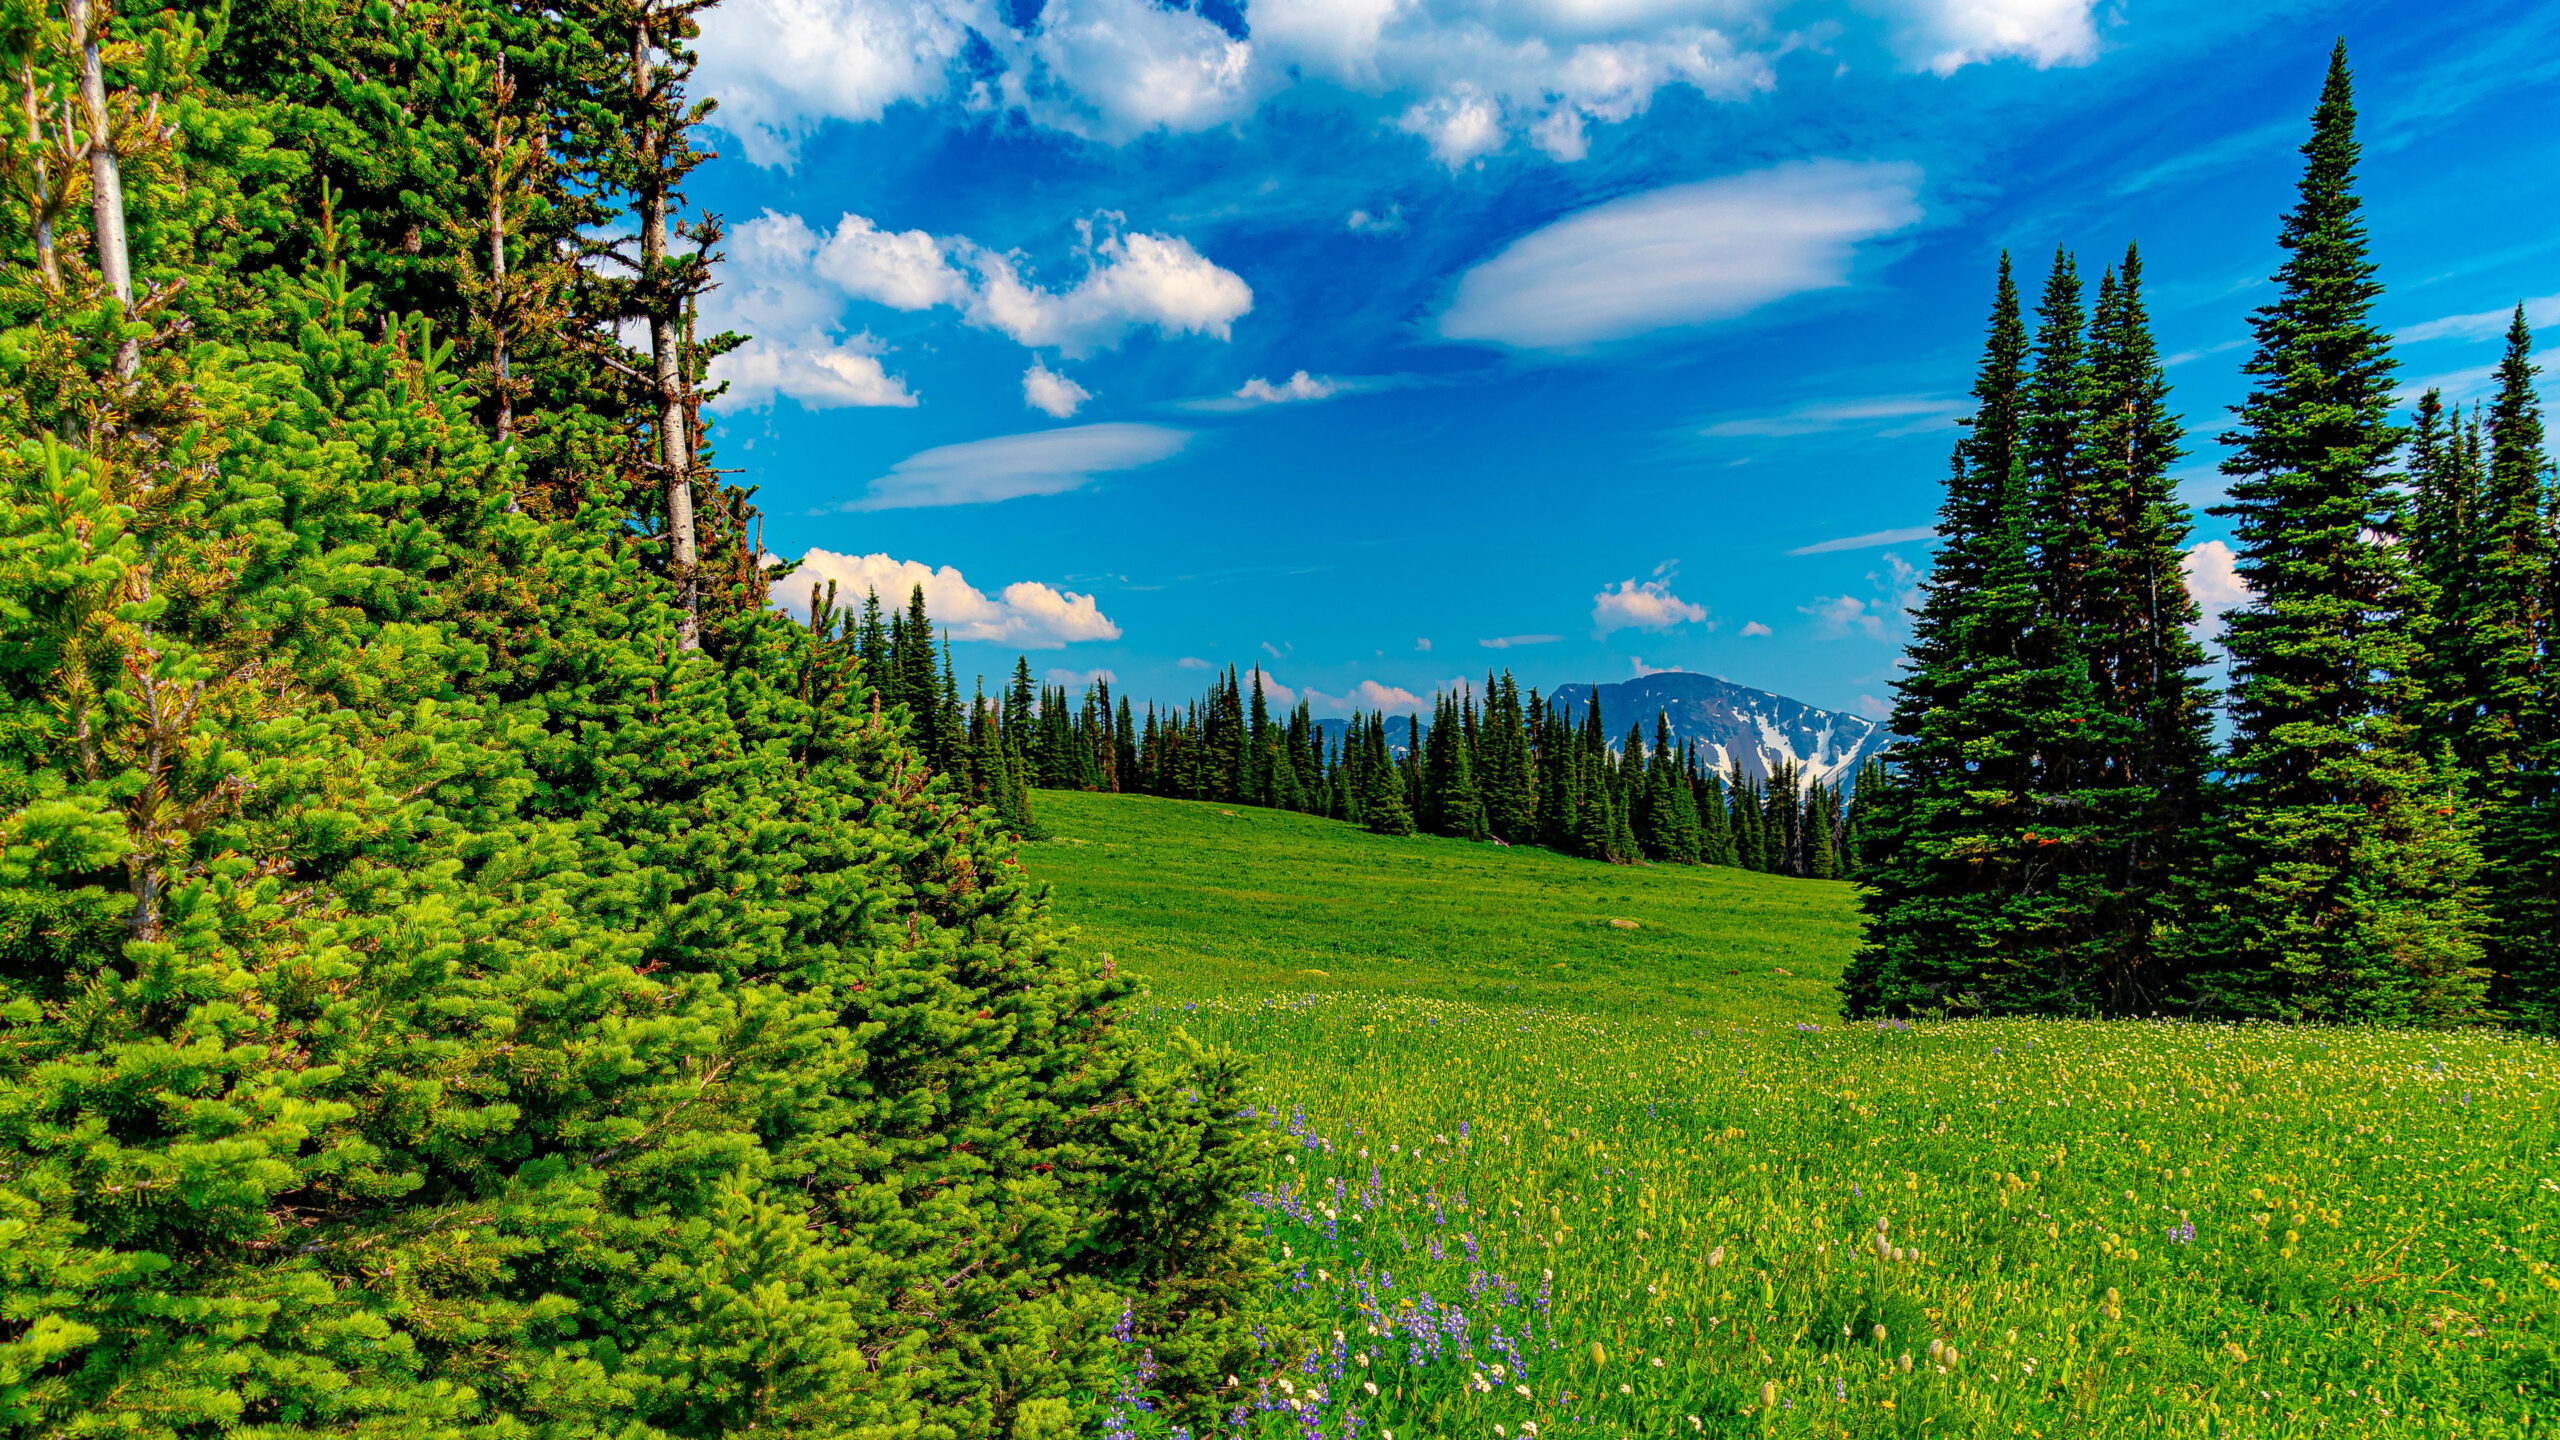 Green Spruce Trees Grass Field Yellow Purple Flowers Mountain With Snow Under White Clouds Blue Sky During Daytime K HD Mountain